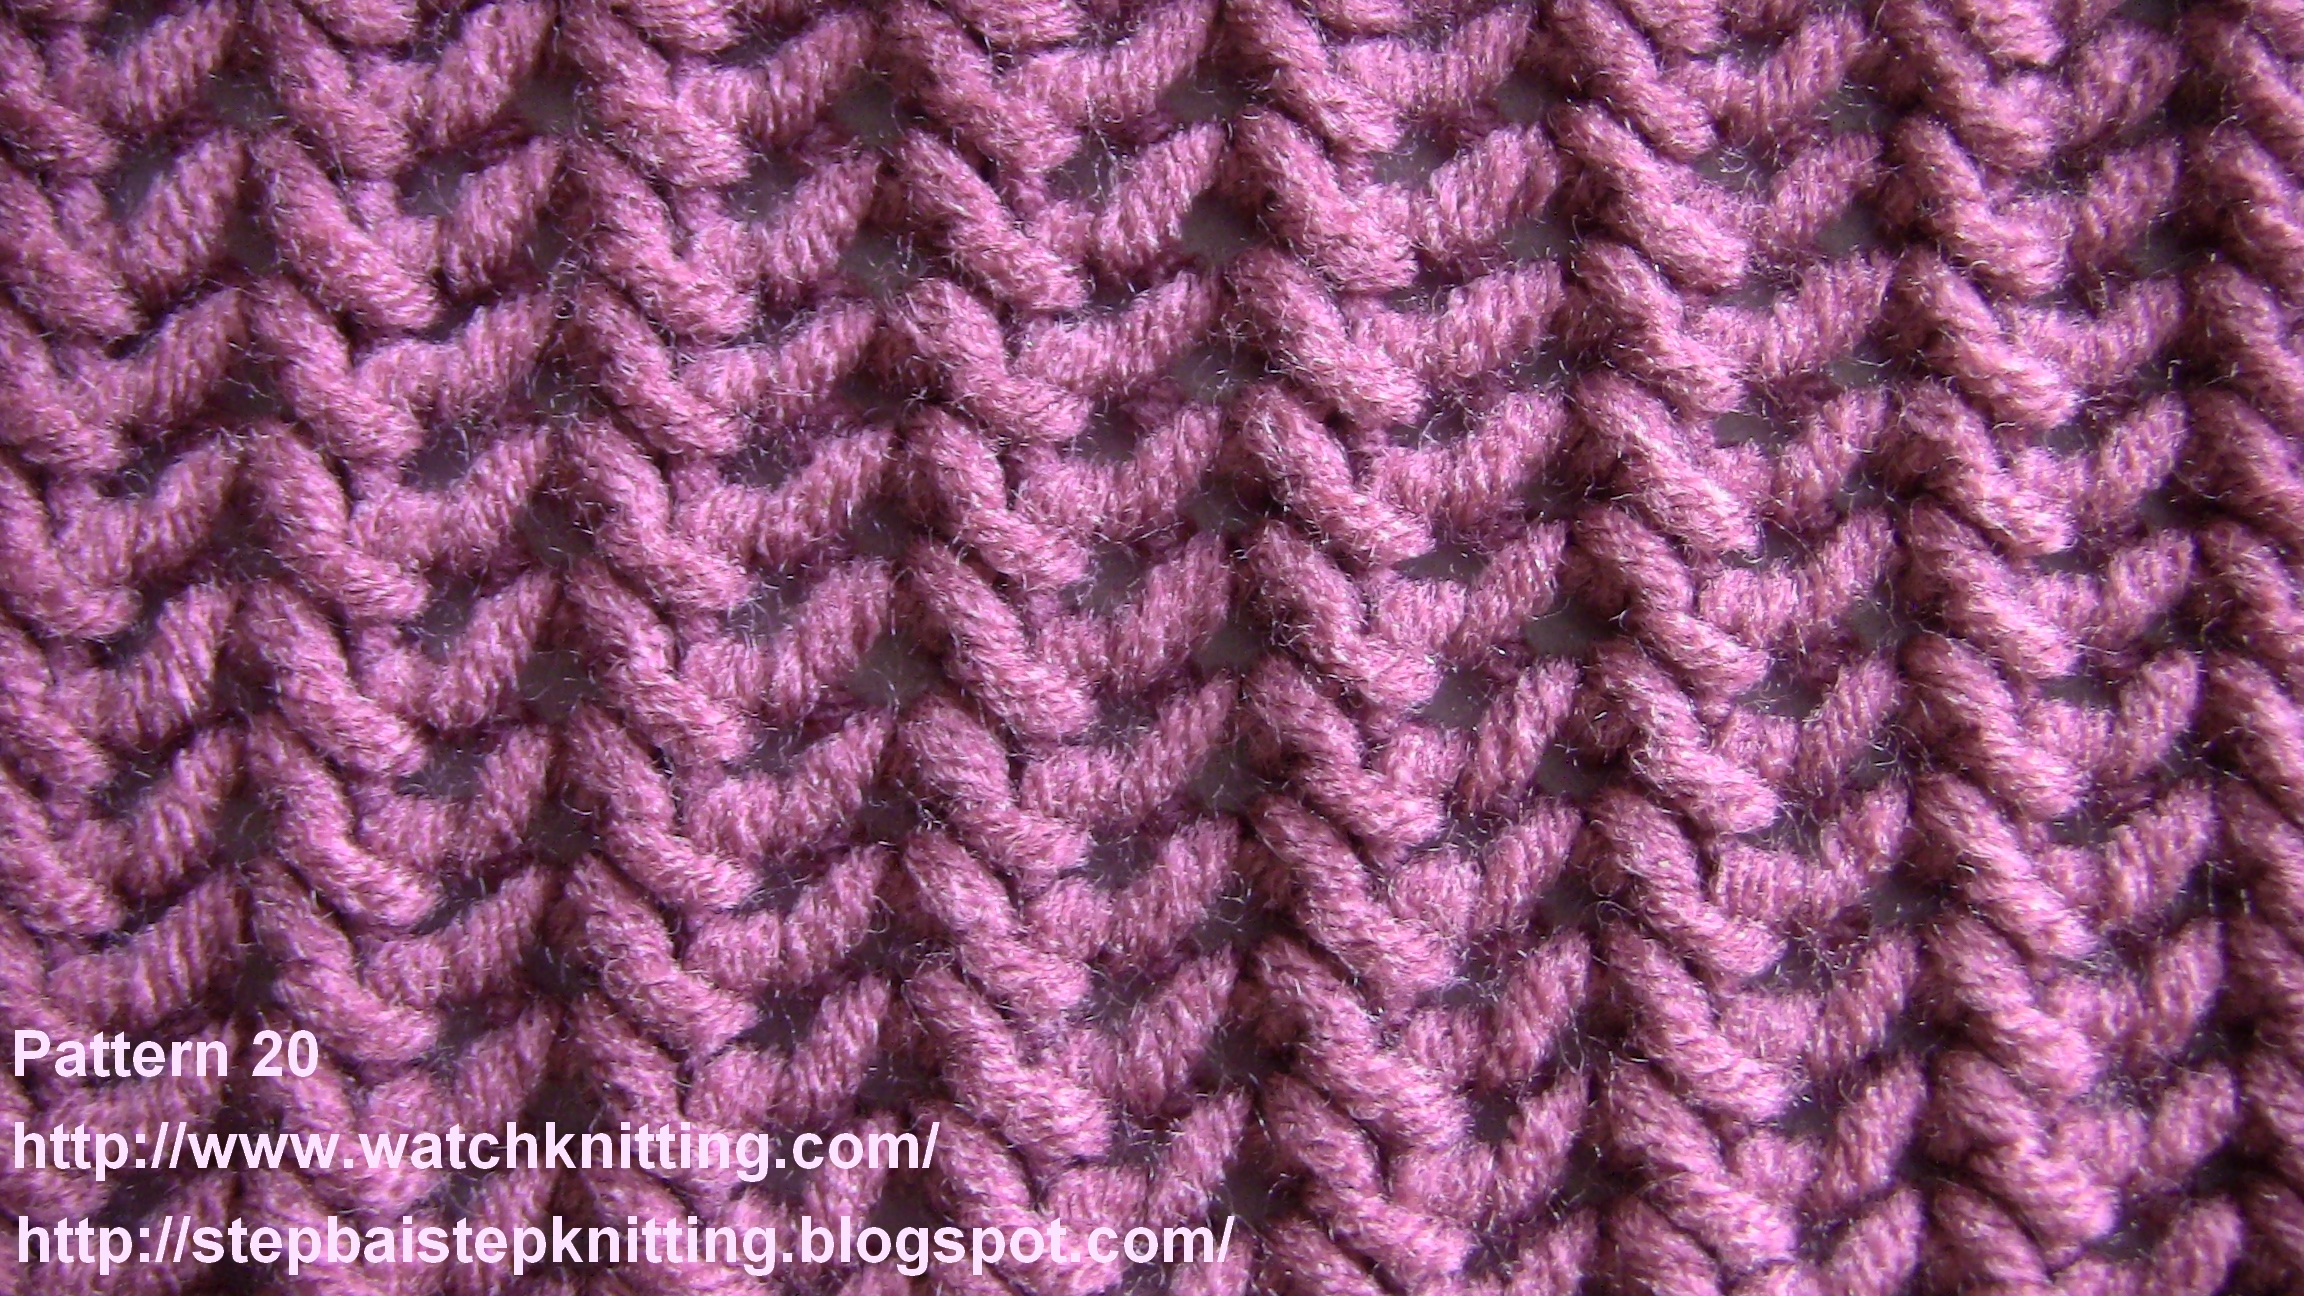 Video: Knitting Patterns: Stitches | eHow.c
om